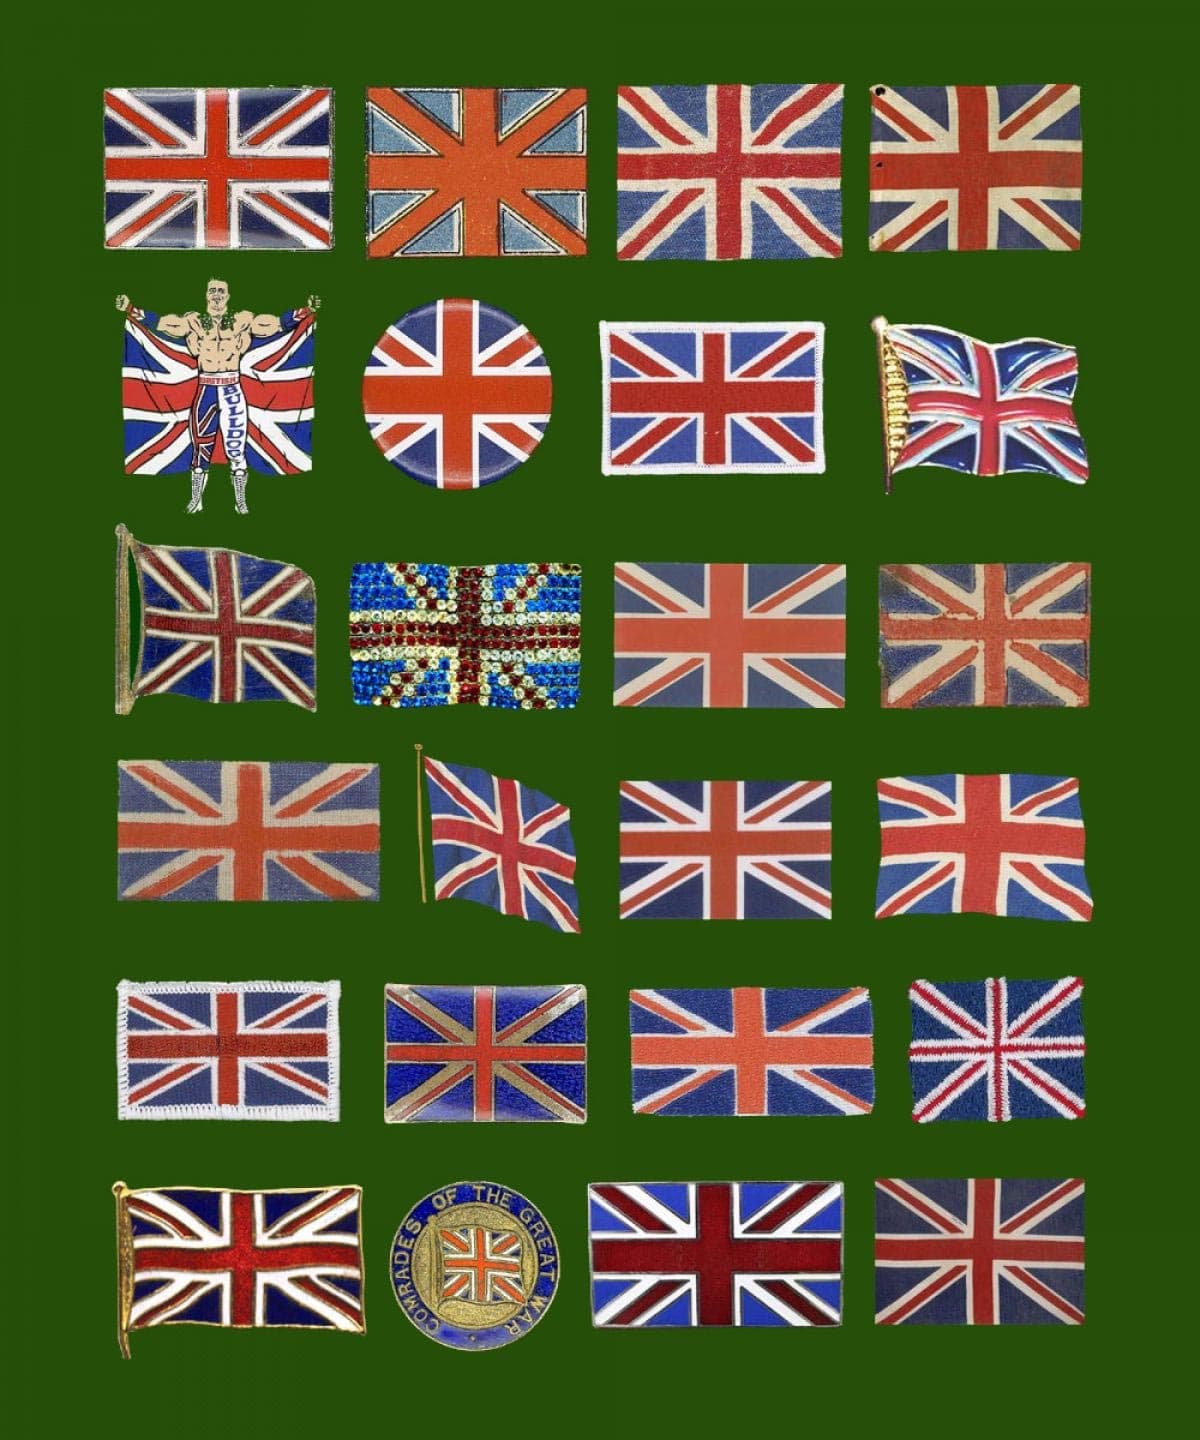 Found Art: 24 Flags Enlarged